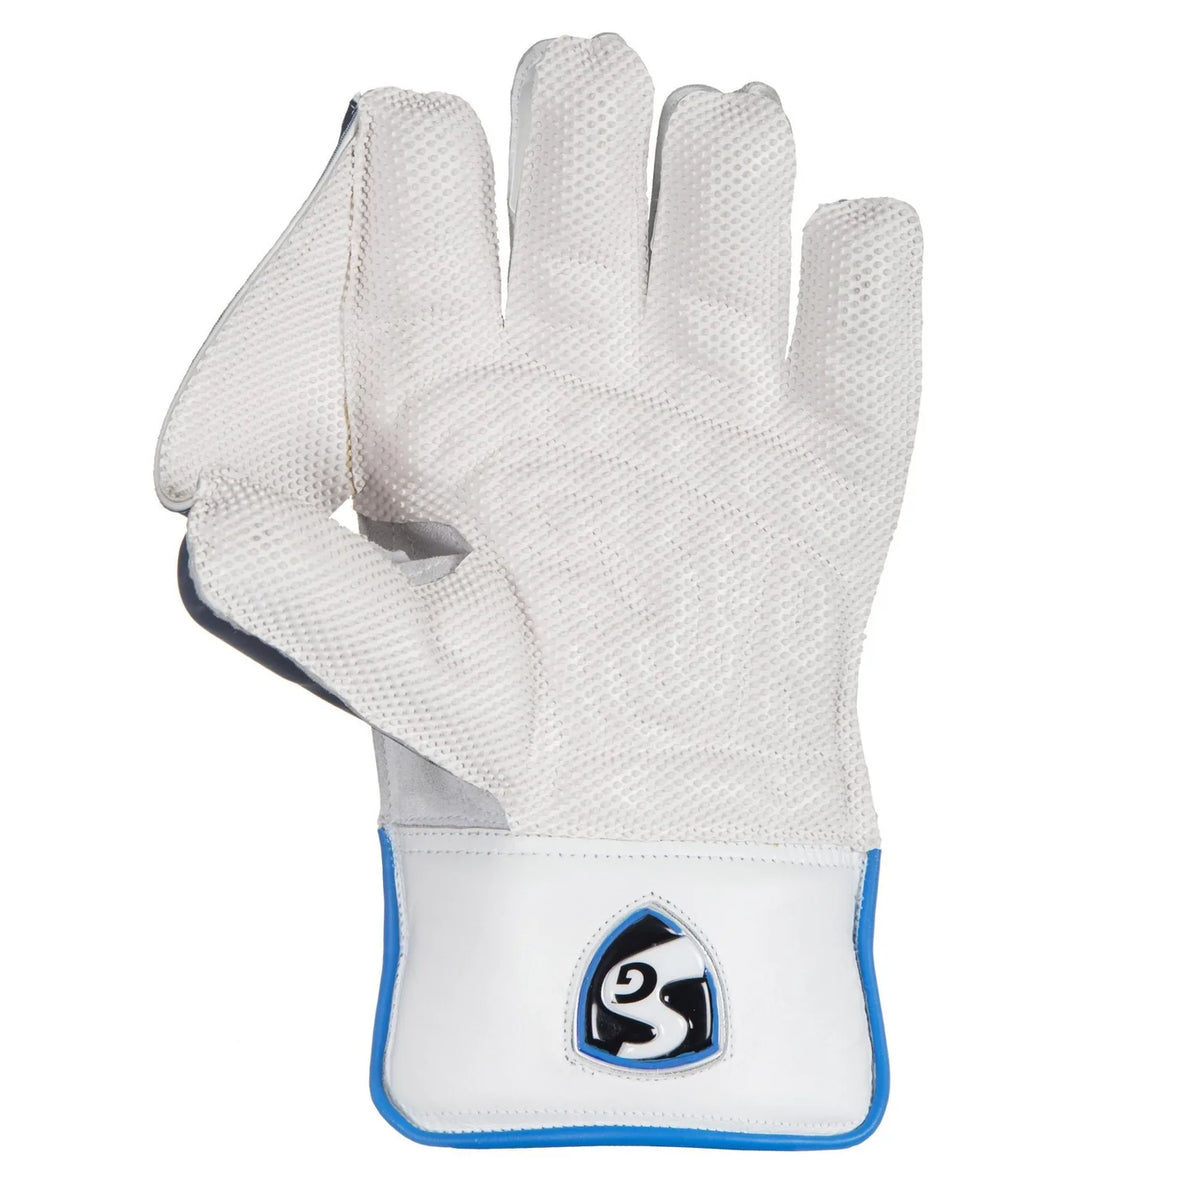 Pre-Order SG Tournament Wicket Keeping Gloves